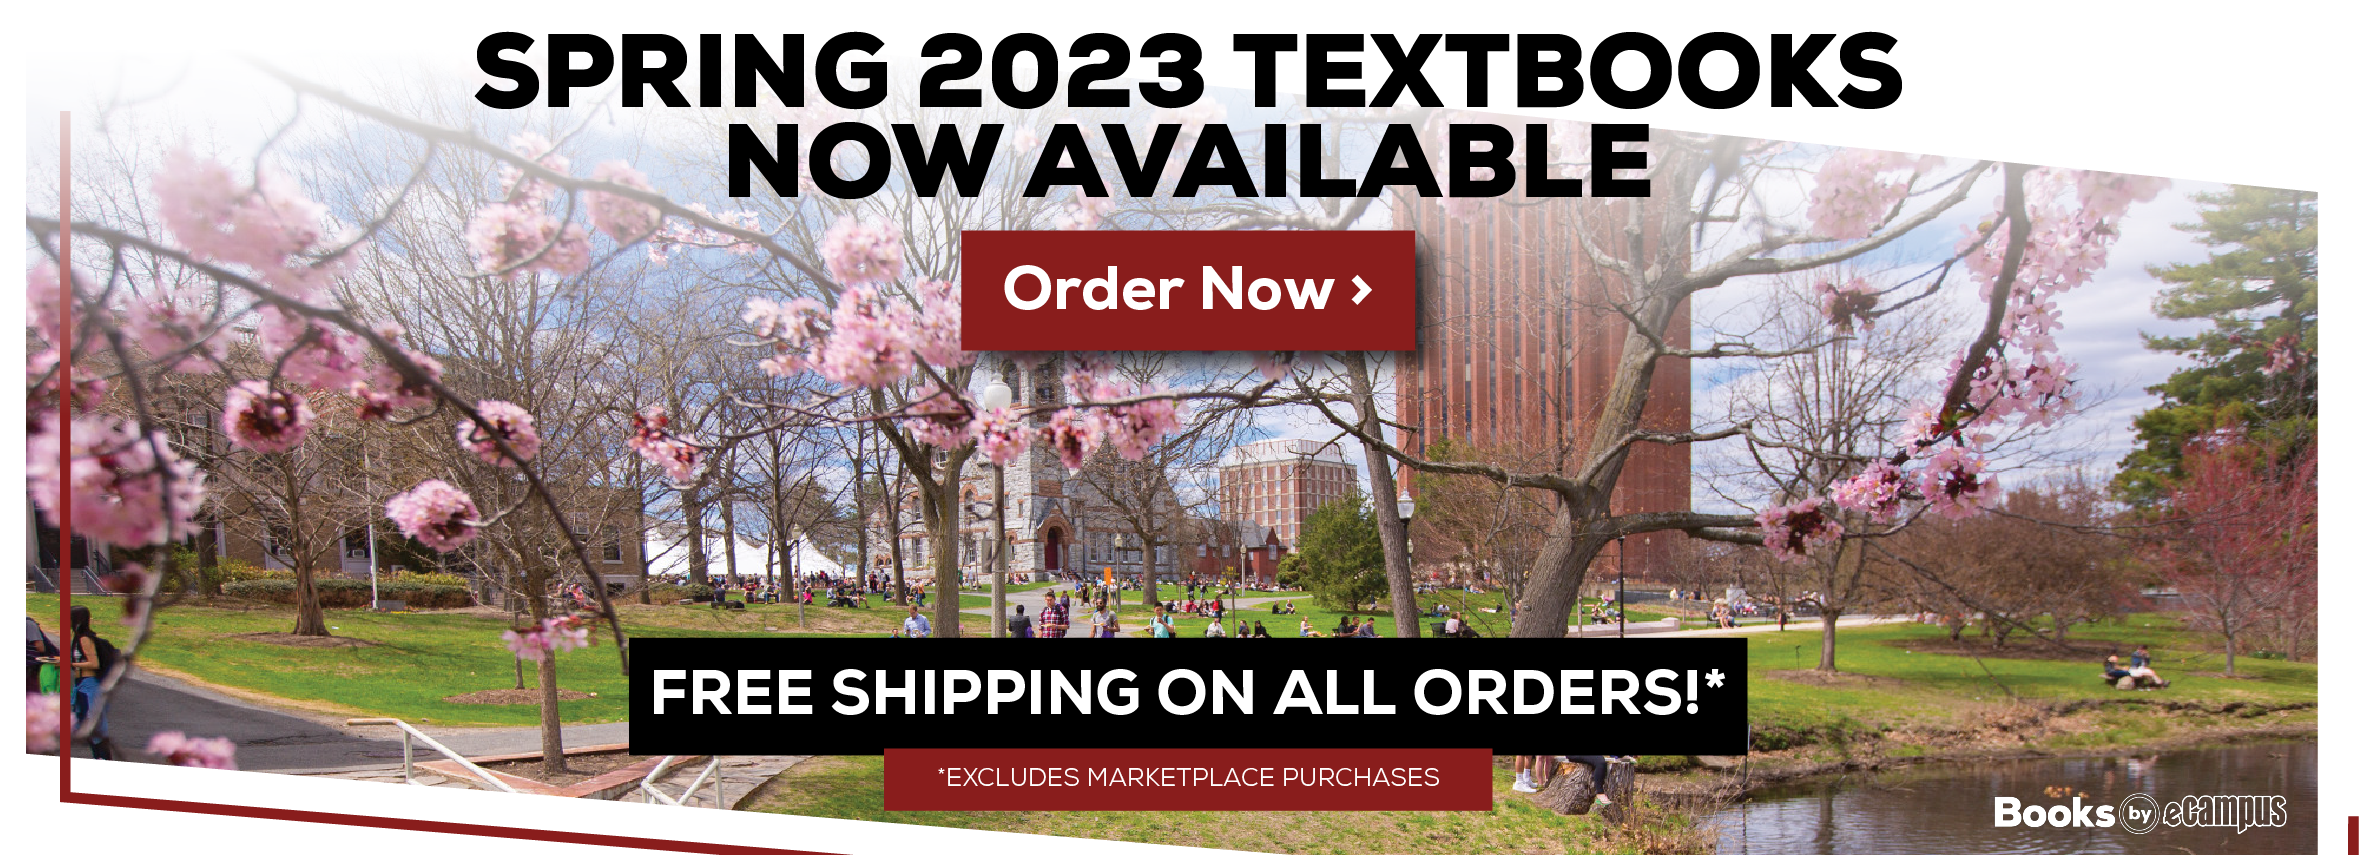 Spring  2023 Textbooks Now Available. Order Now. Free shipping on all orders.